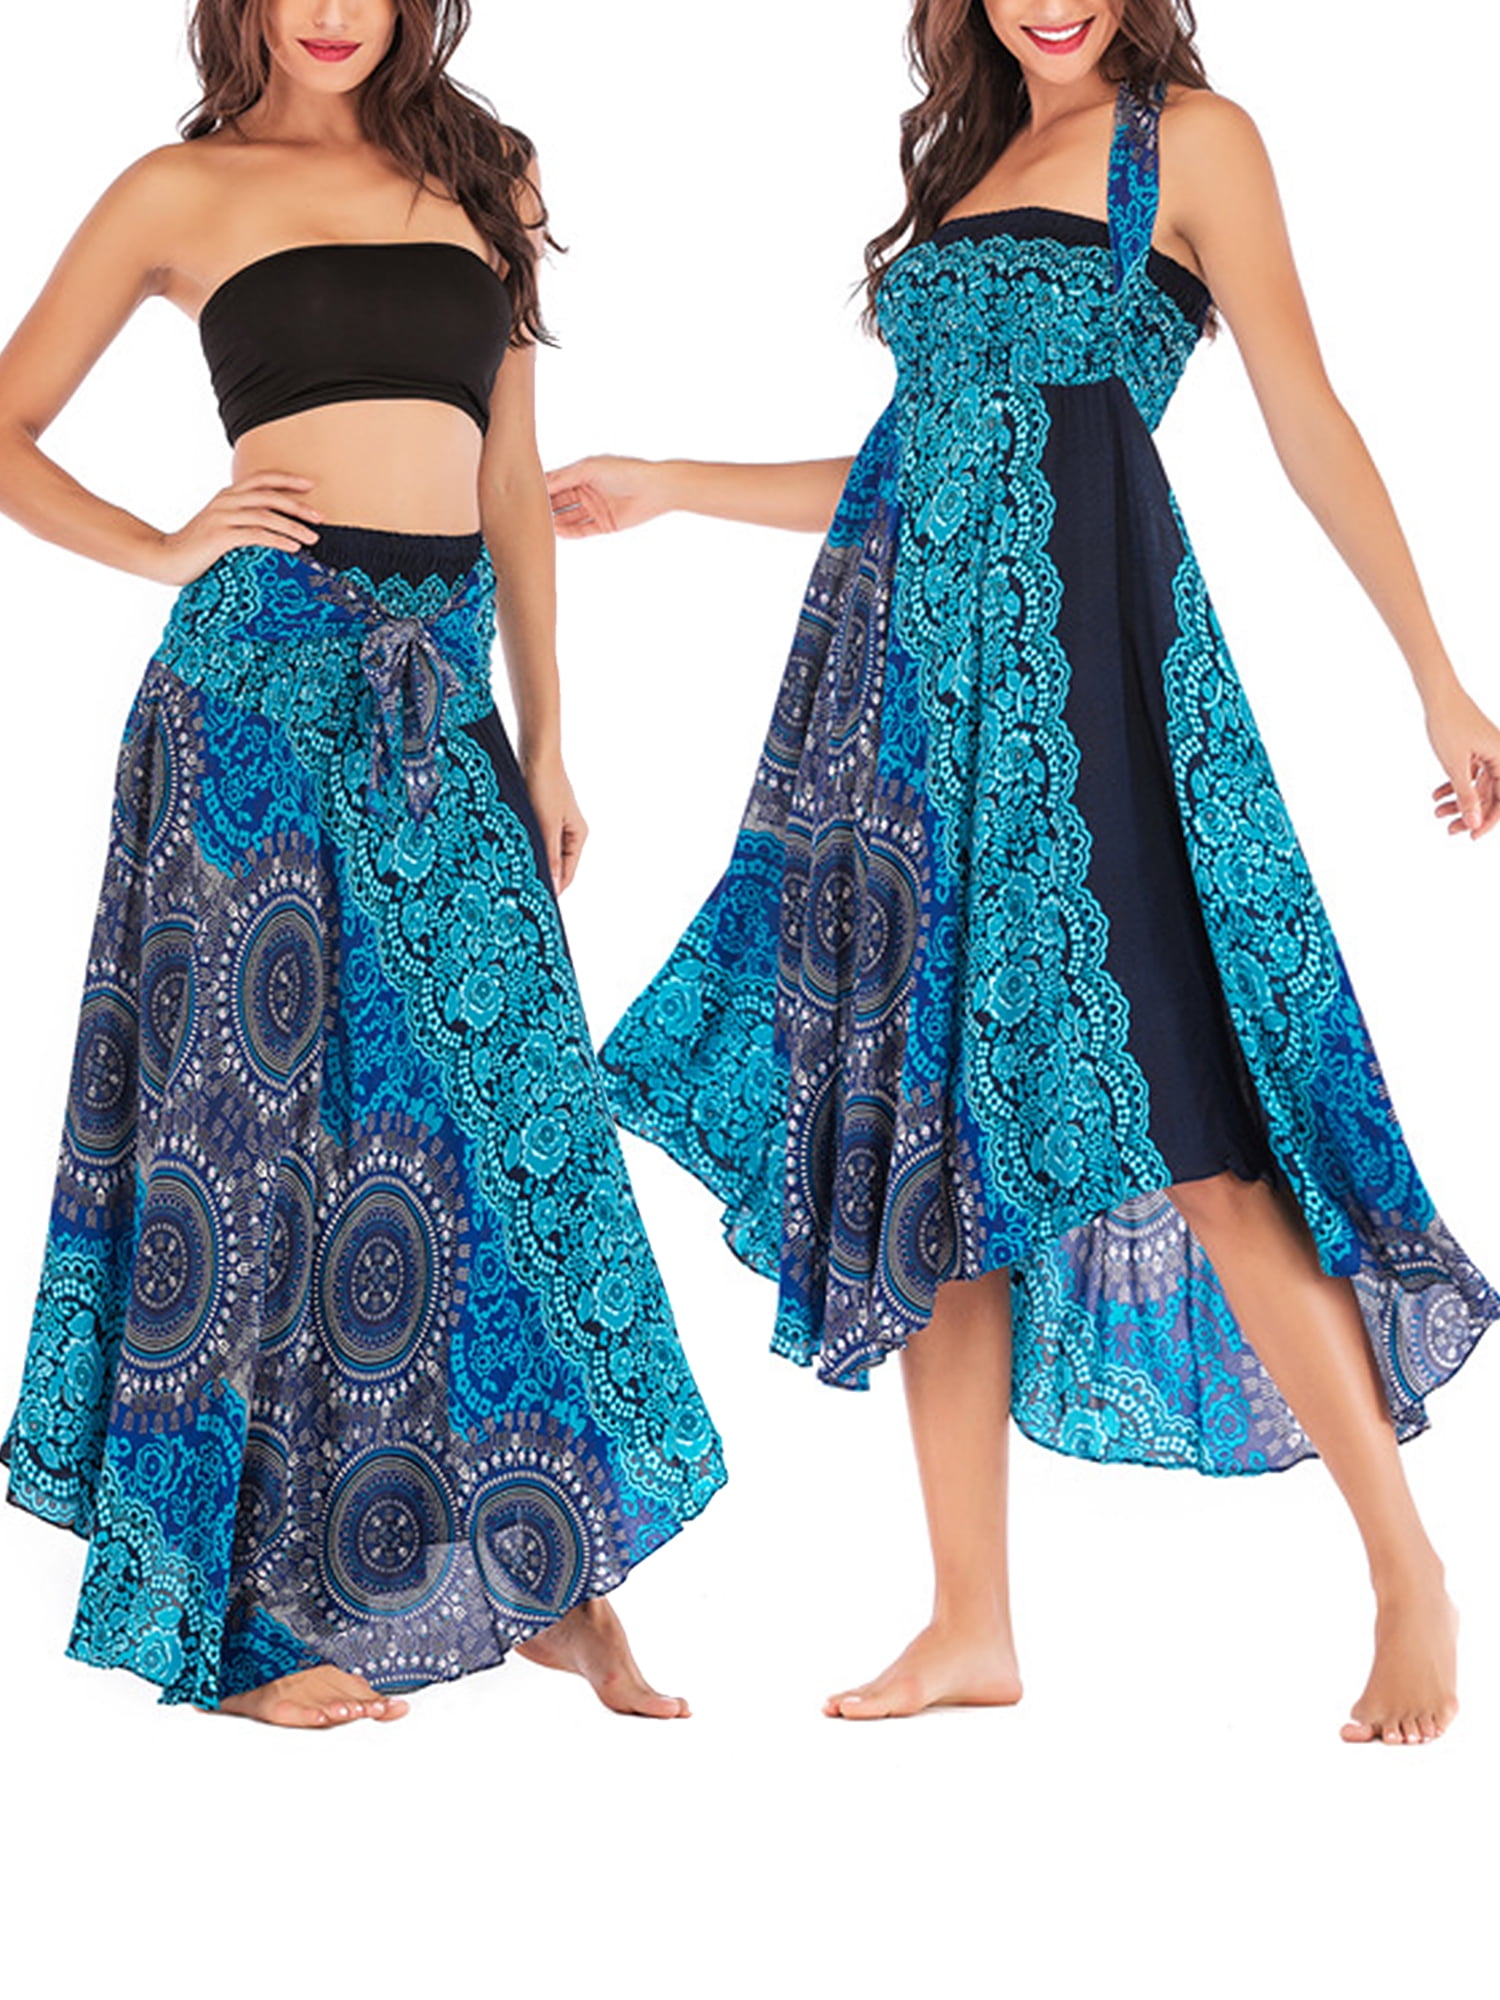 Ladies Womens Long Plain Belted Maxi Boho Style Gypsy Vintage Jersey Knit Skirt 